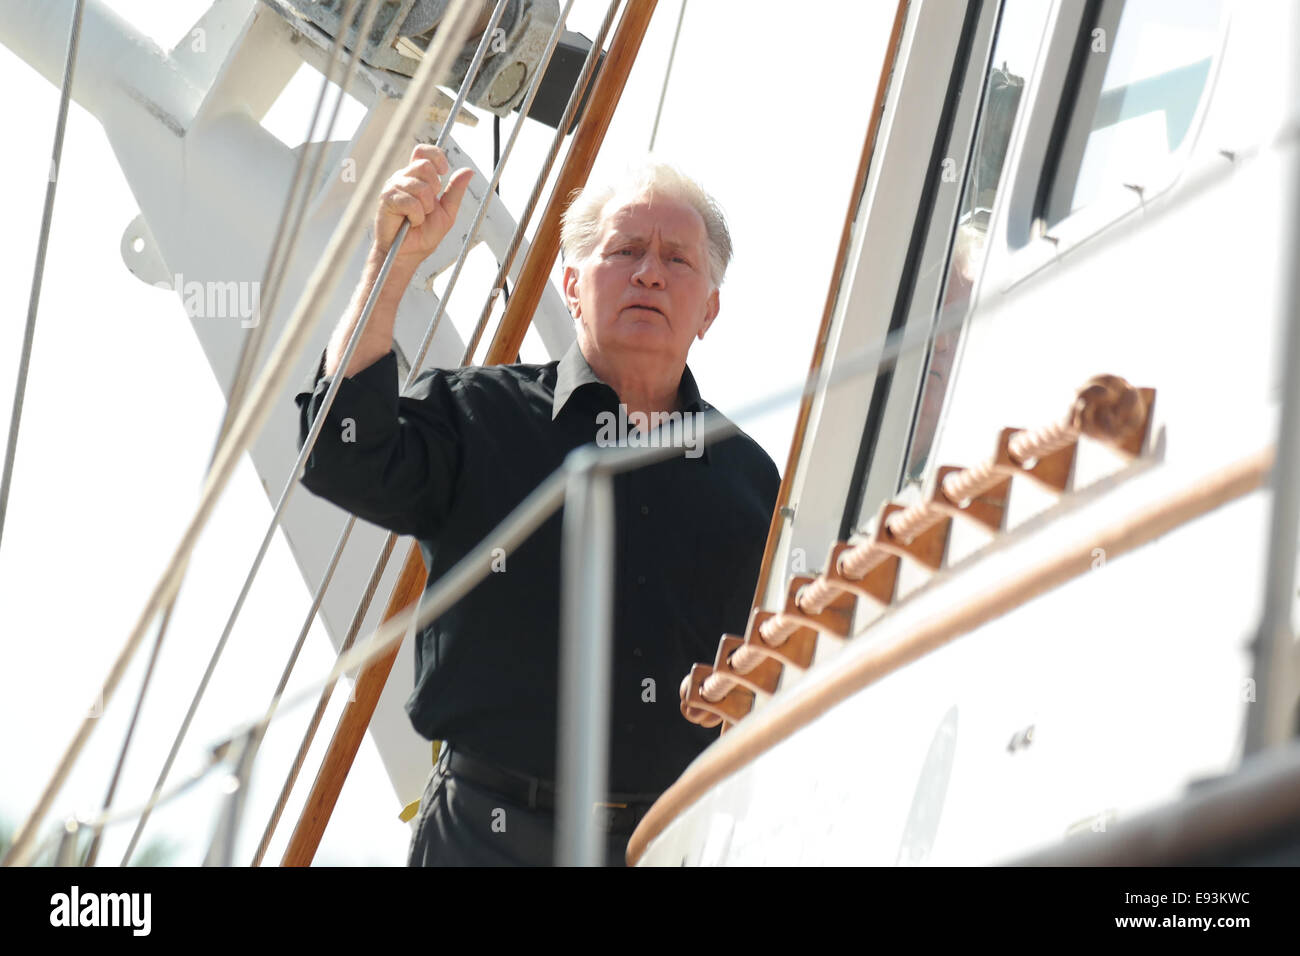 Marina Del Rey, California, USA. 18th Oct, 2014. Actor and activist Martin Sheen at the christening of Sea Shepherd Conservation Society USA's newest vessel, named the Martin Sheen. In addition to christening the ship and announcing its name, Sea Shepherd also announced an upcoming marine conservation campaign in which the new Martin Sheen vessel will be used. Credit:  Jonathan Alcorn/ZUMA Wire/Alamy Live News Stock Photo